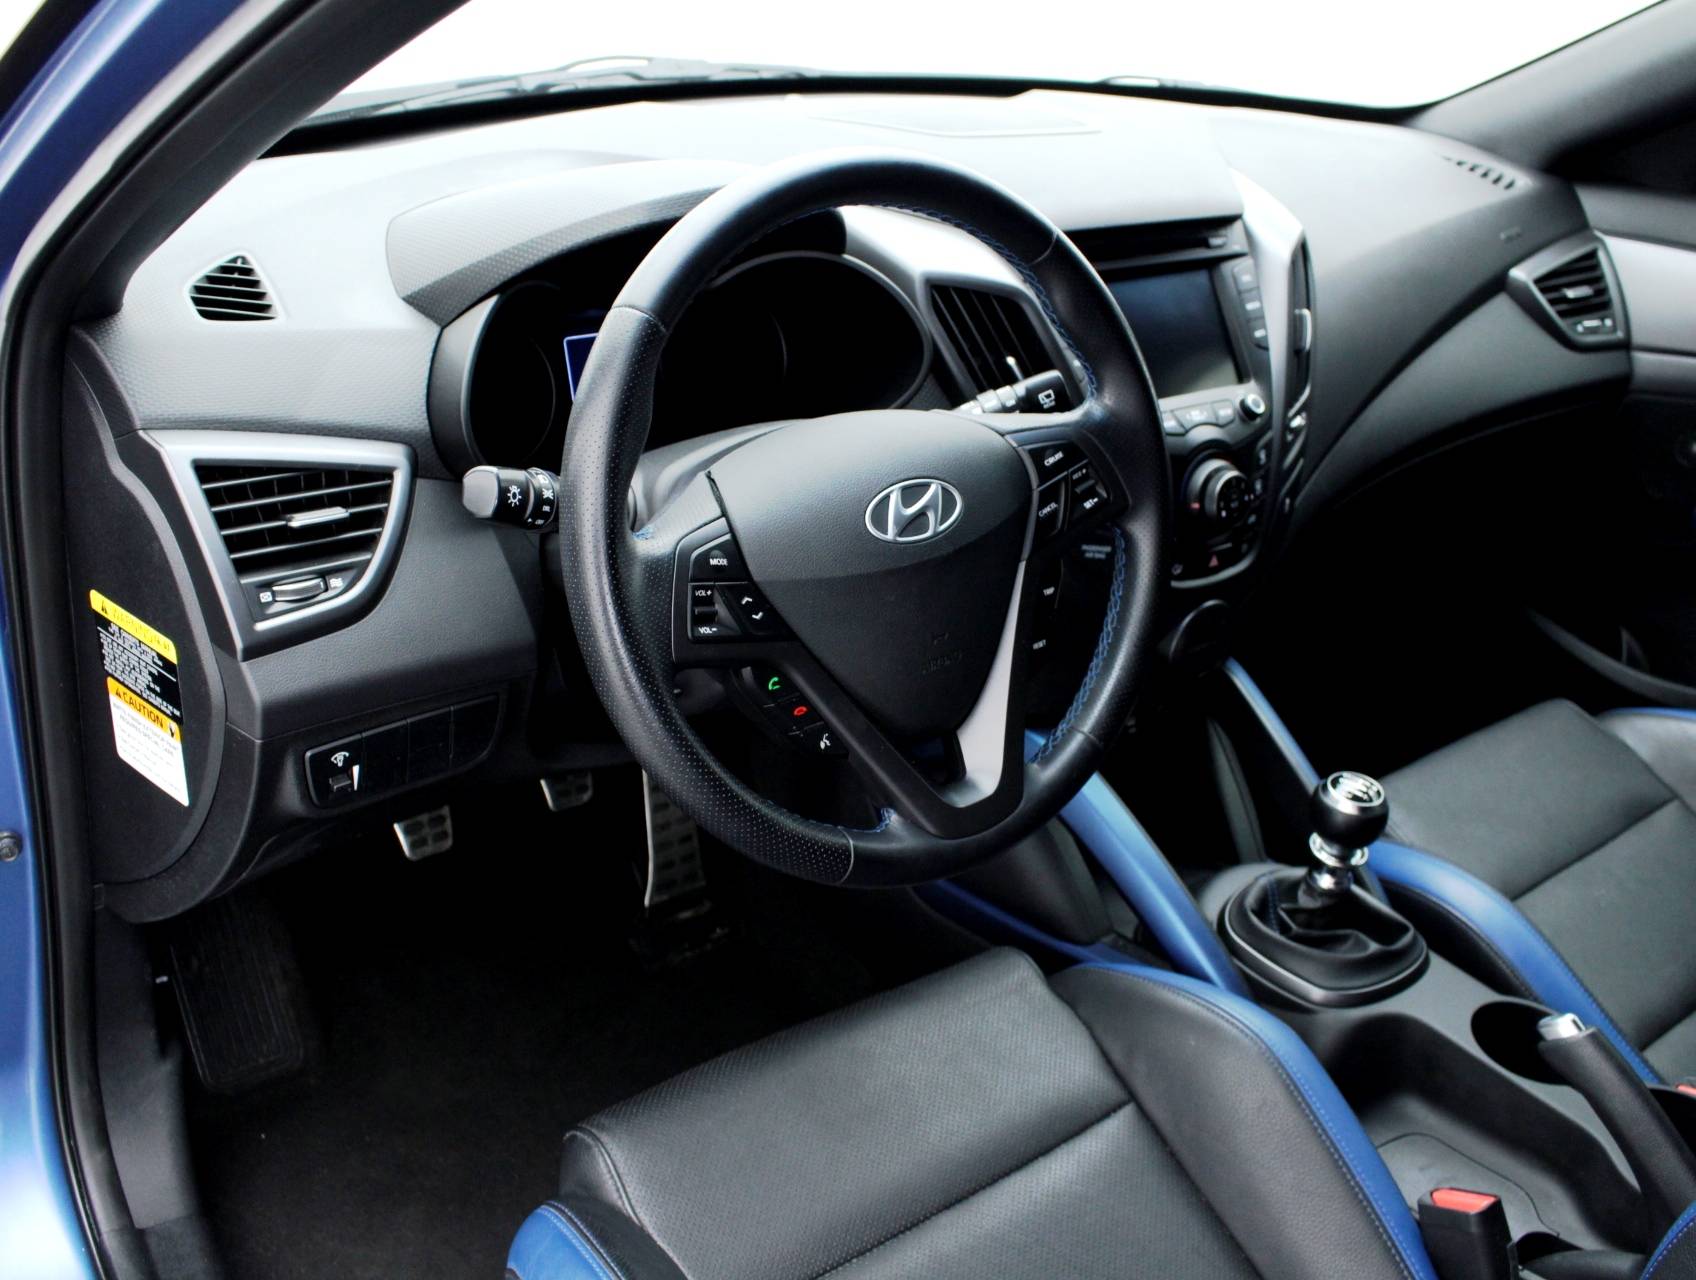 Florida Fine Cars - Used HYUNDAI VELOSTER 2016 WEST PALM RALLY EDITION